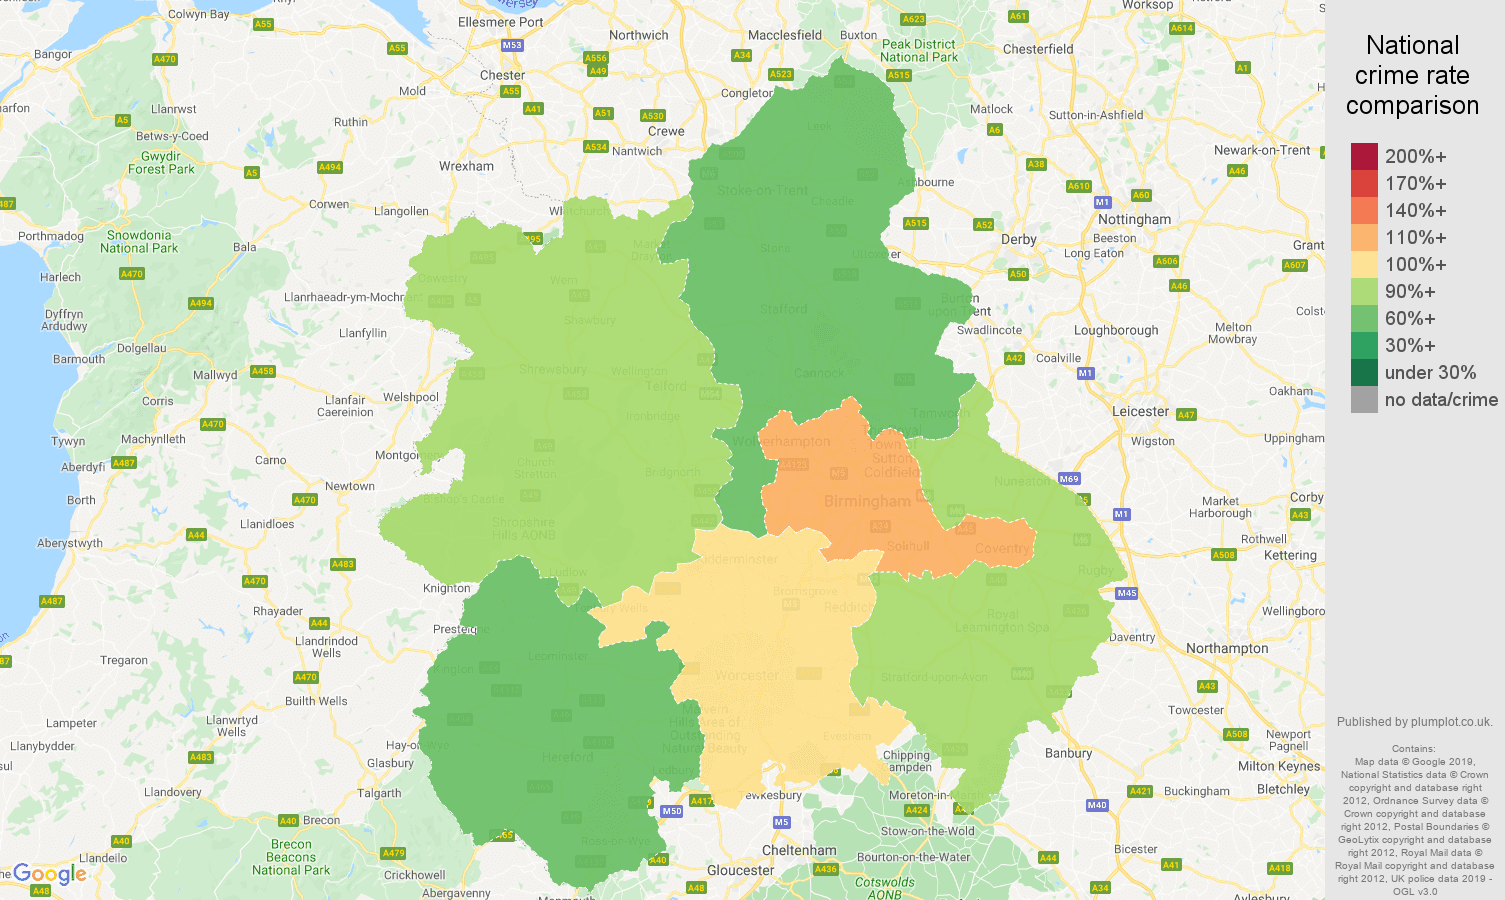 West Midlands possession of weapons crime rate comparison map